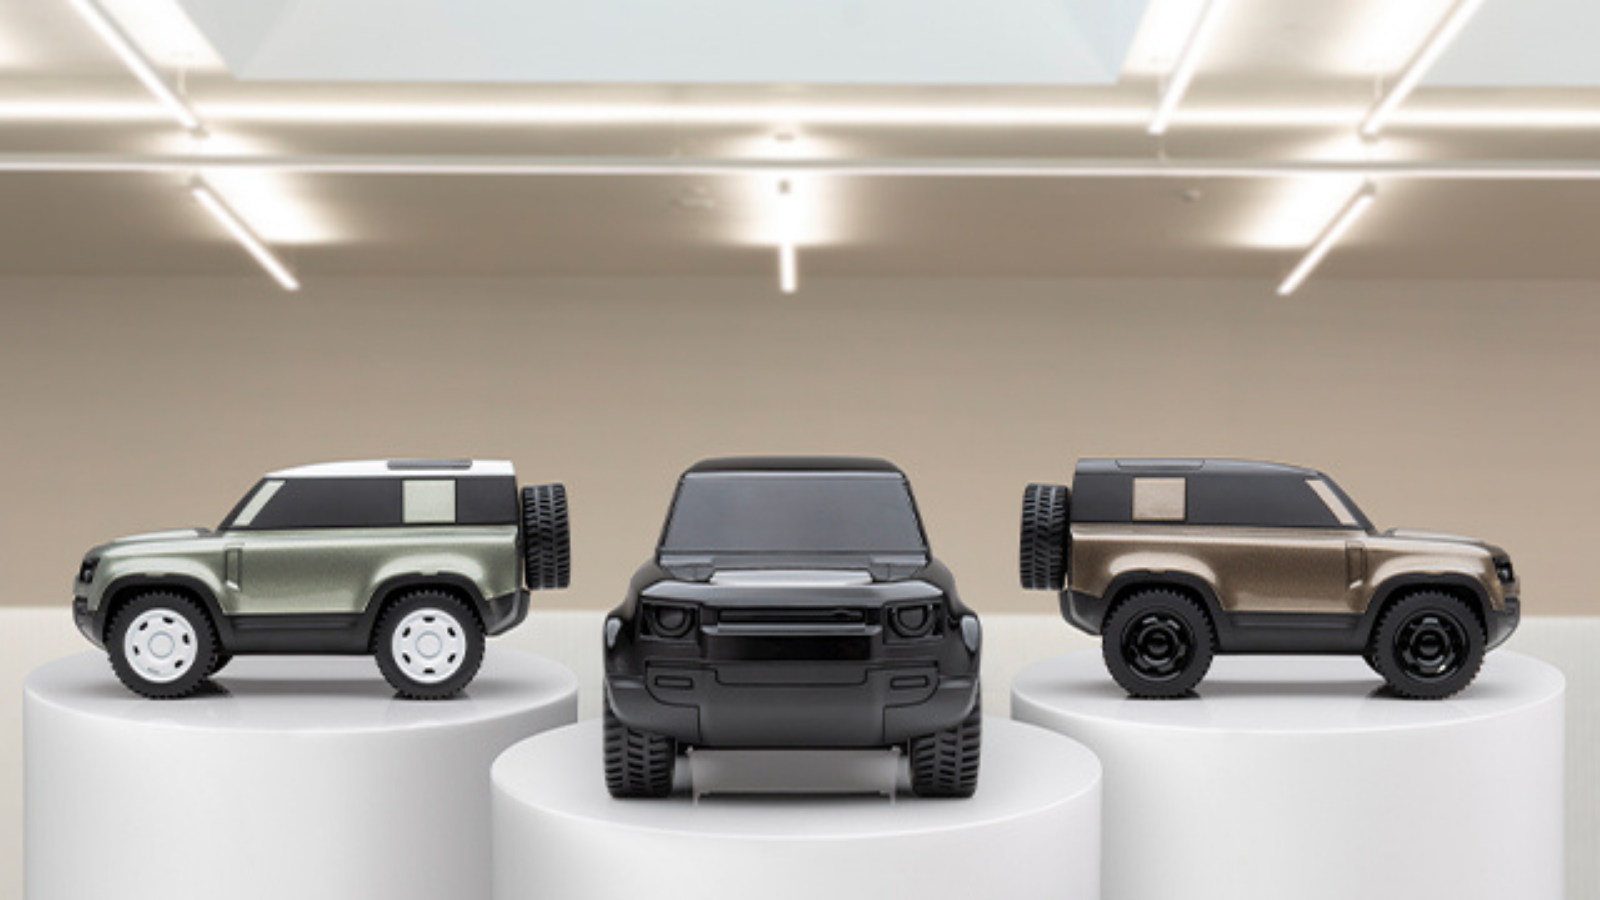 OWN AN ICON: NEW LIMITED-EDITION LAND ROVER DEFENDER DESIGN MODEL’